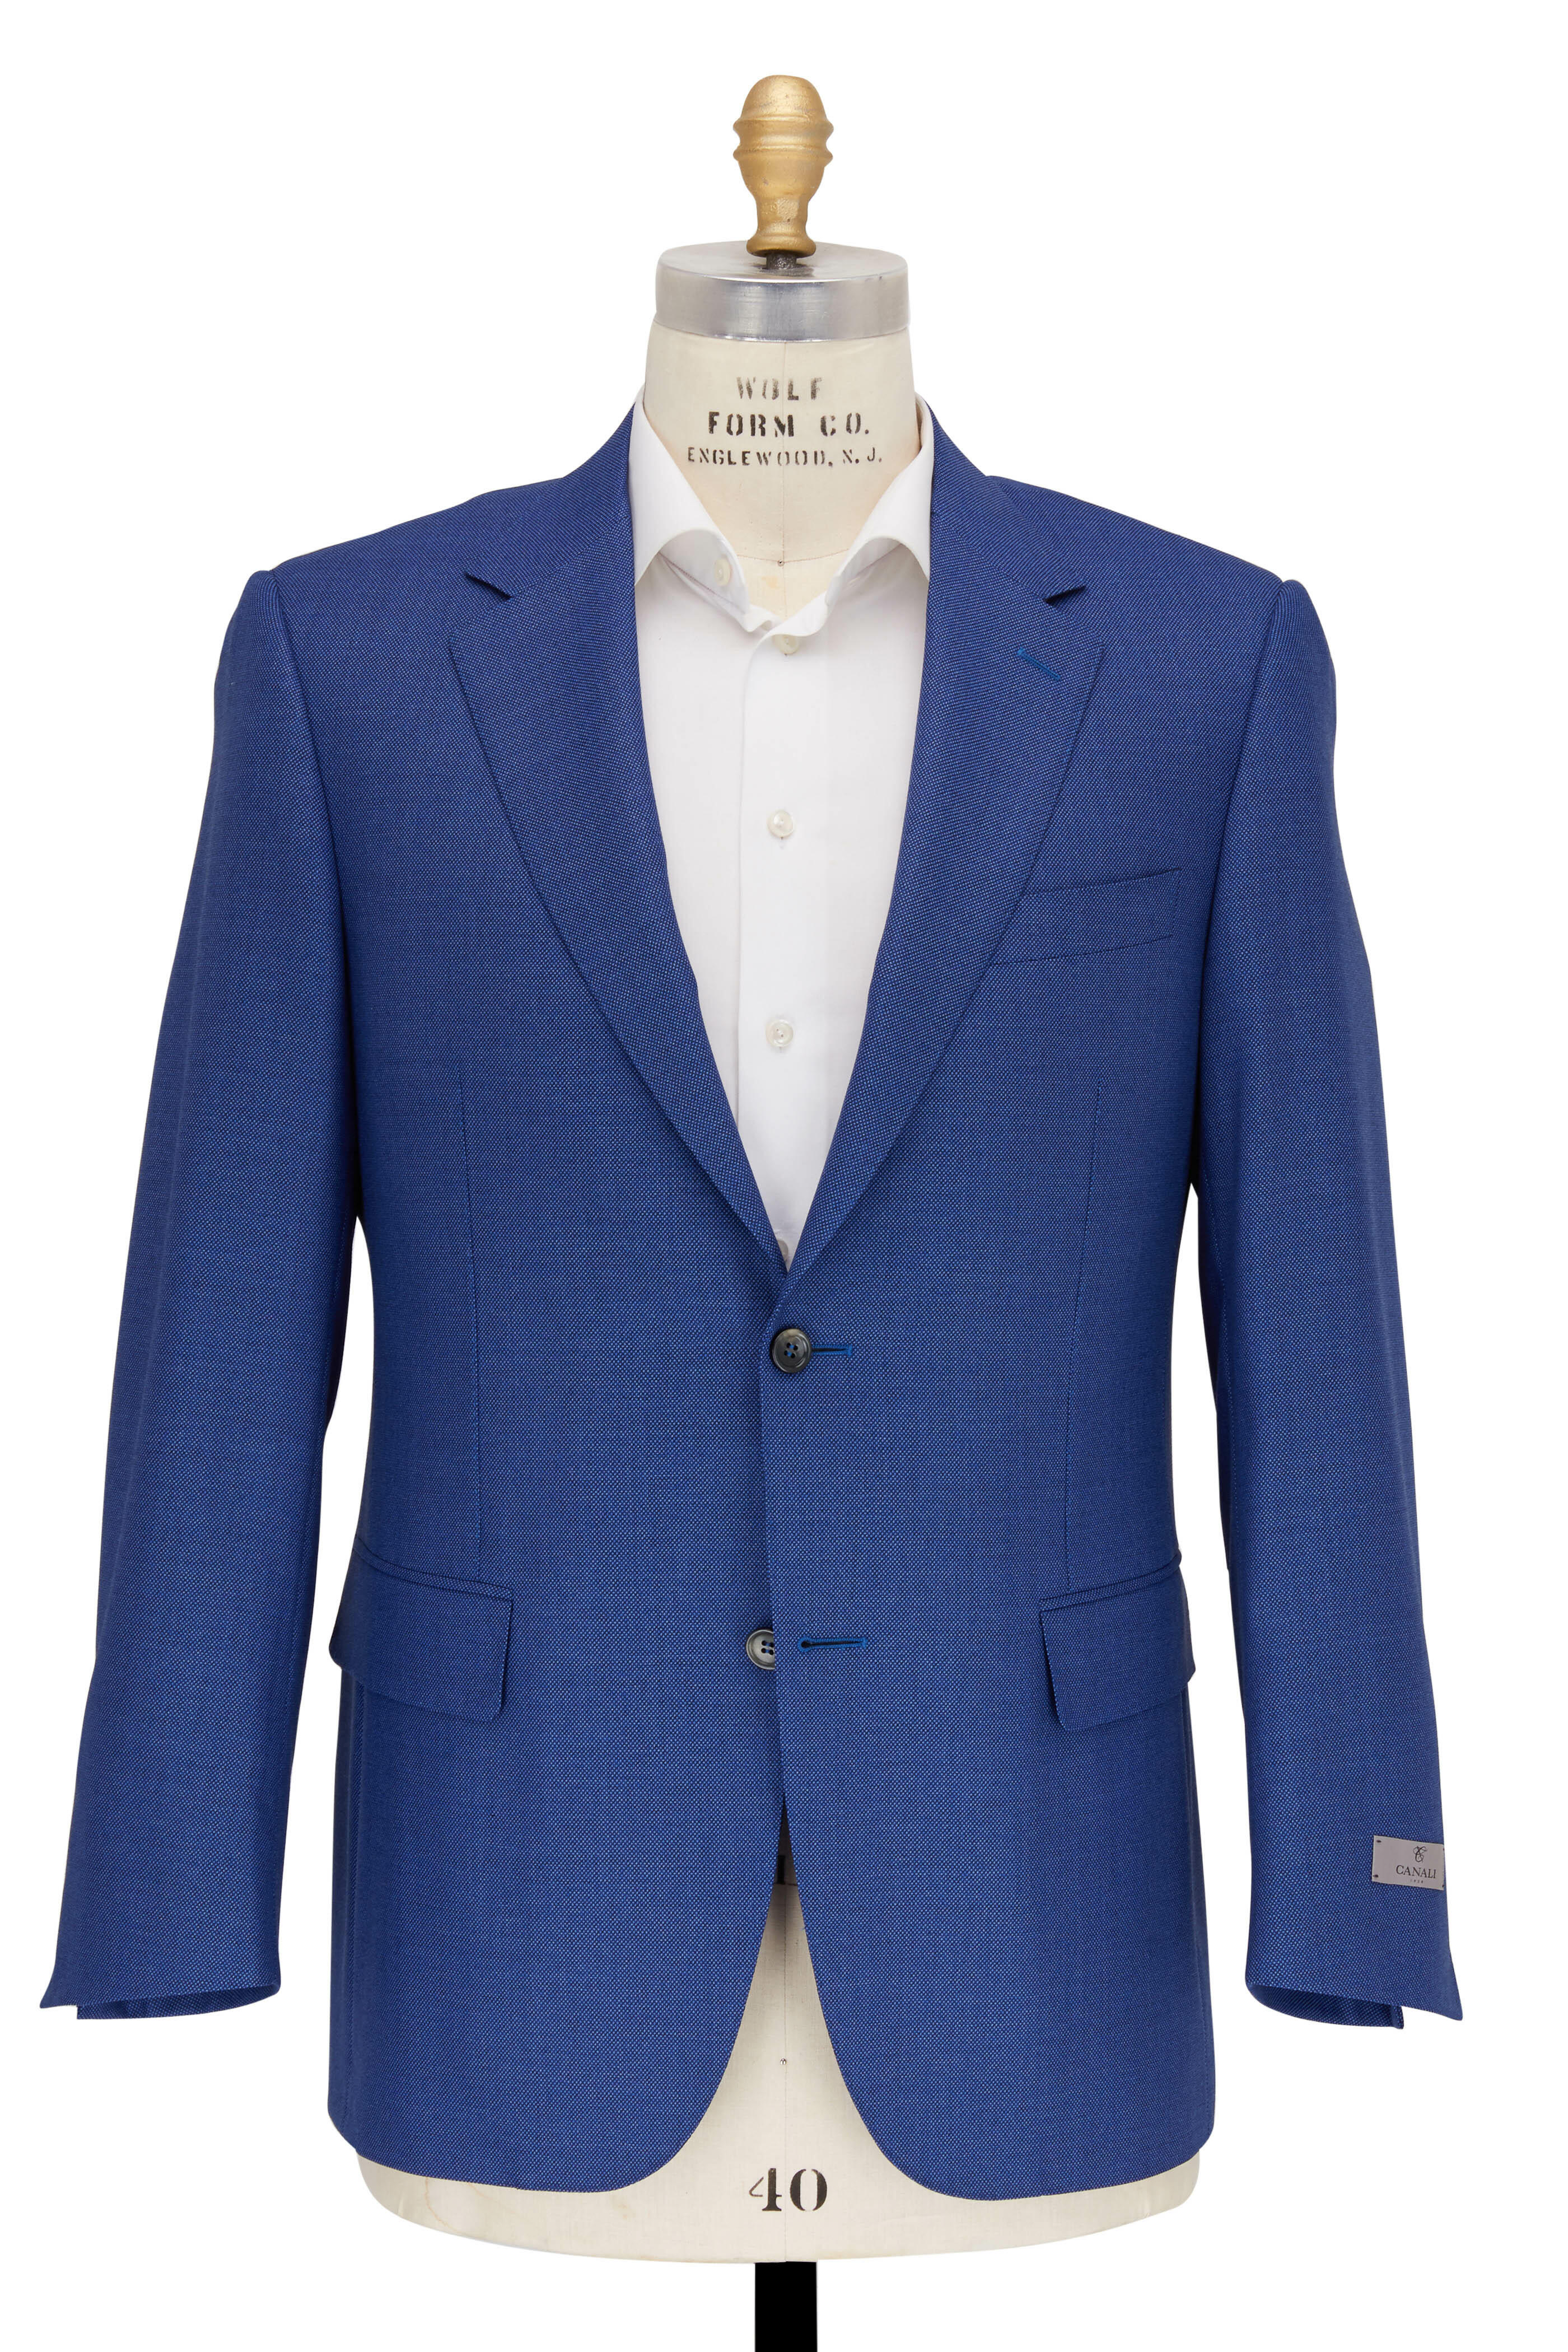 Canali - Royal Blue Birdseye Wool Suit | Mitchell Stores